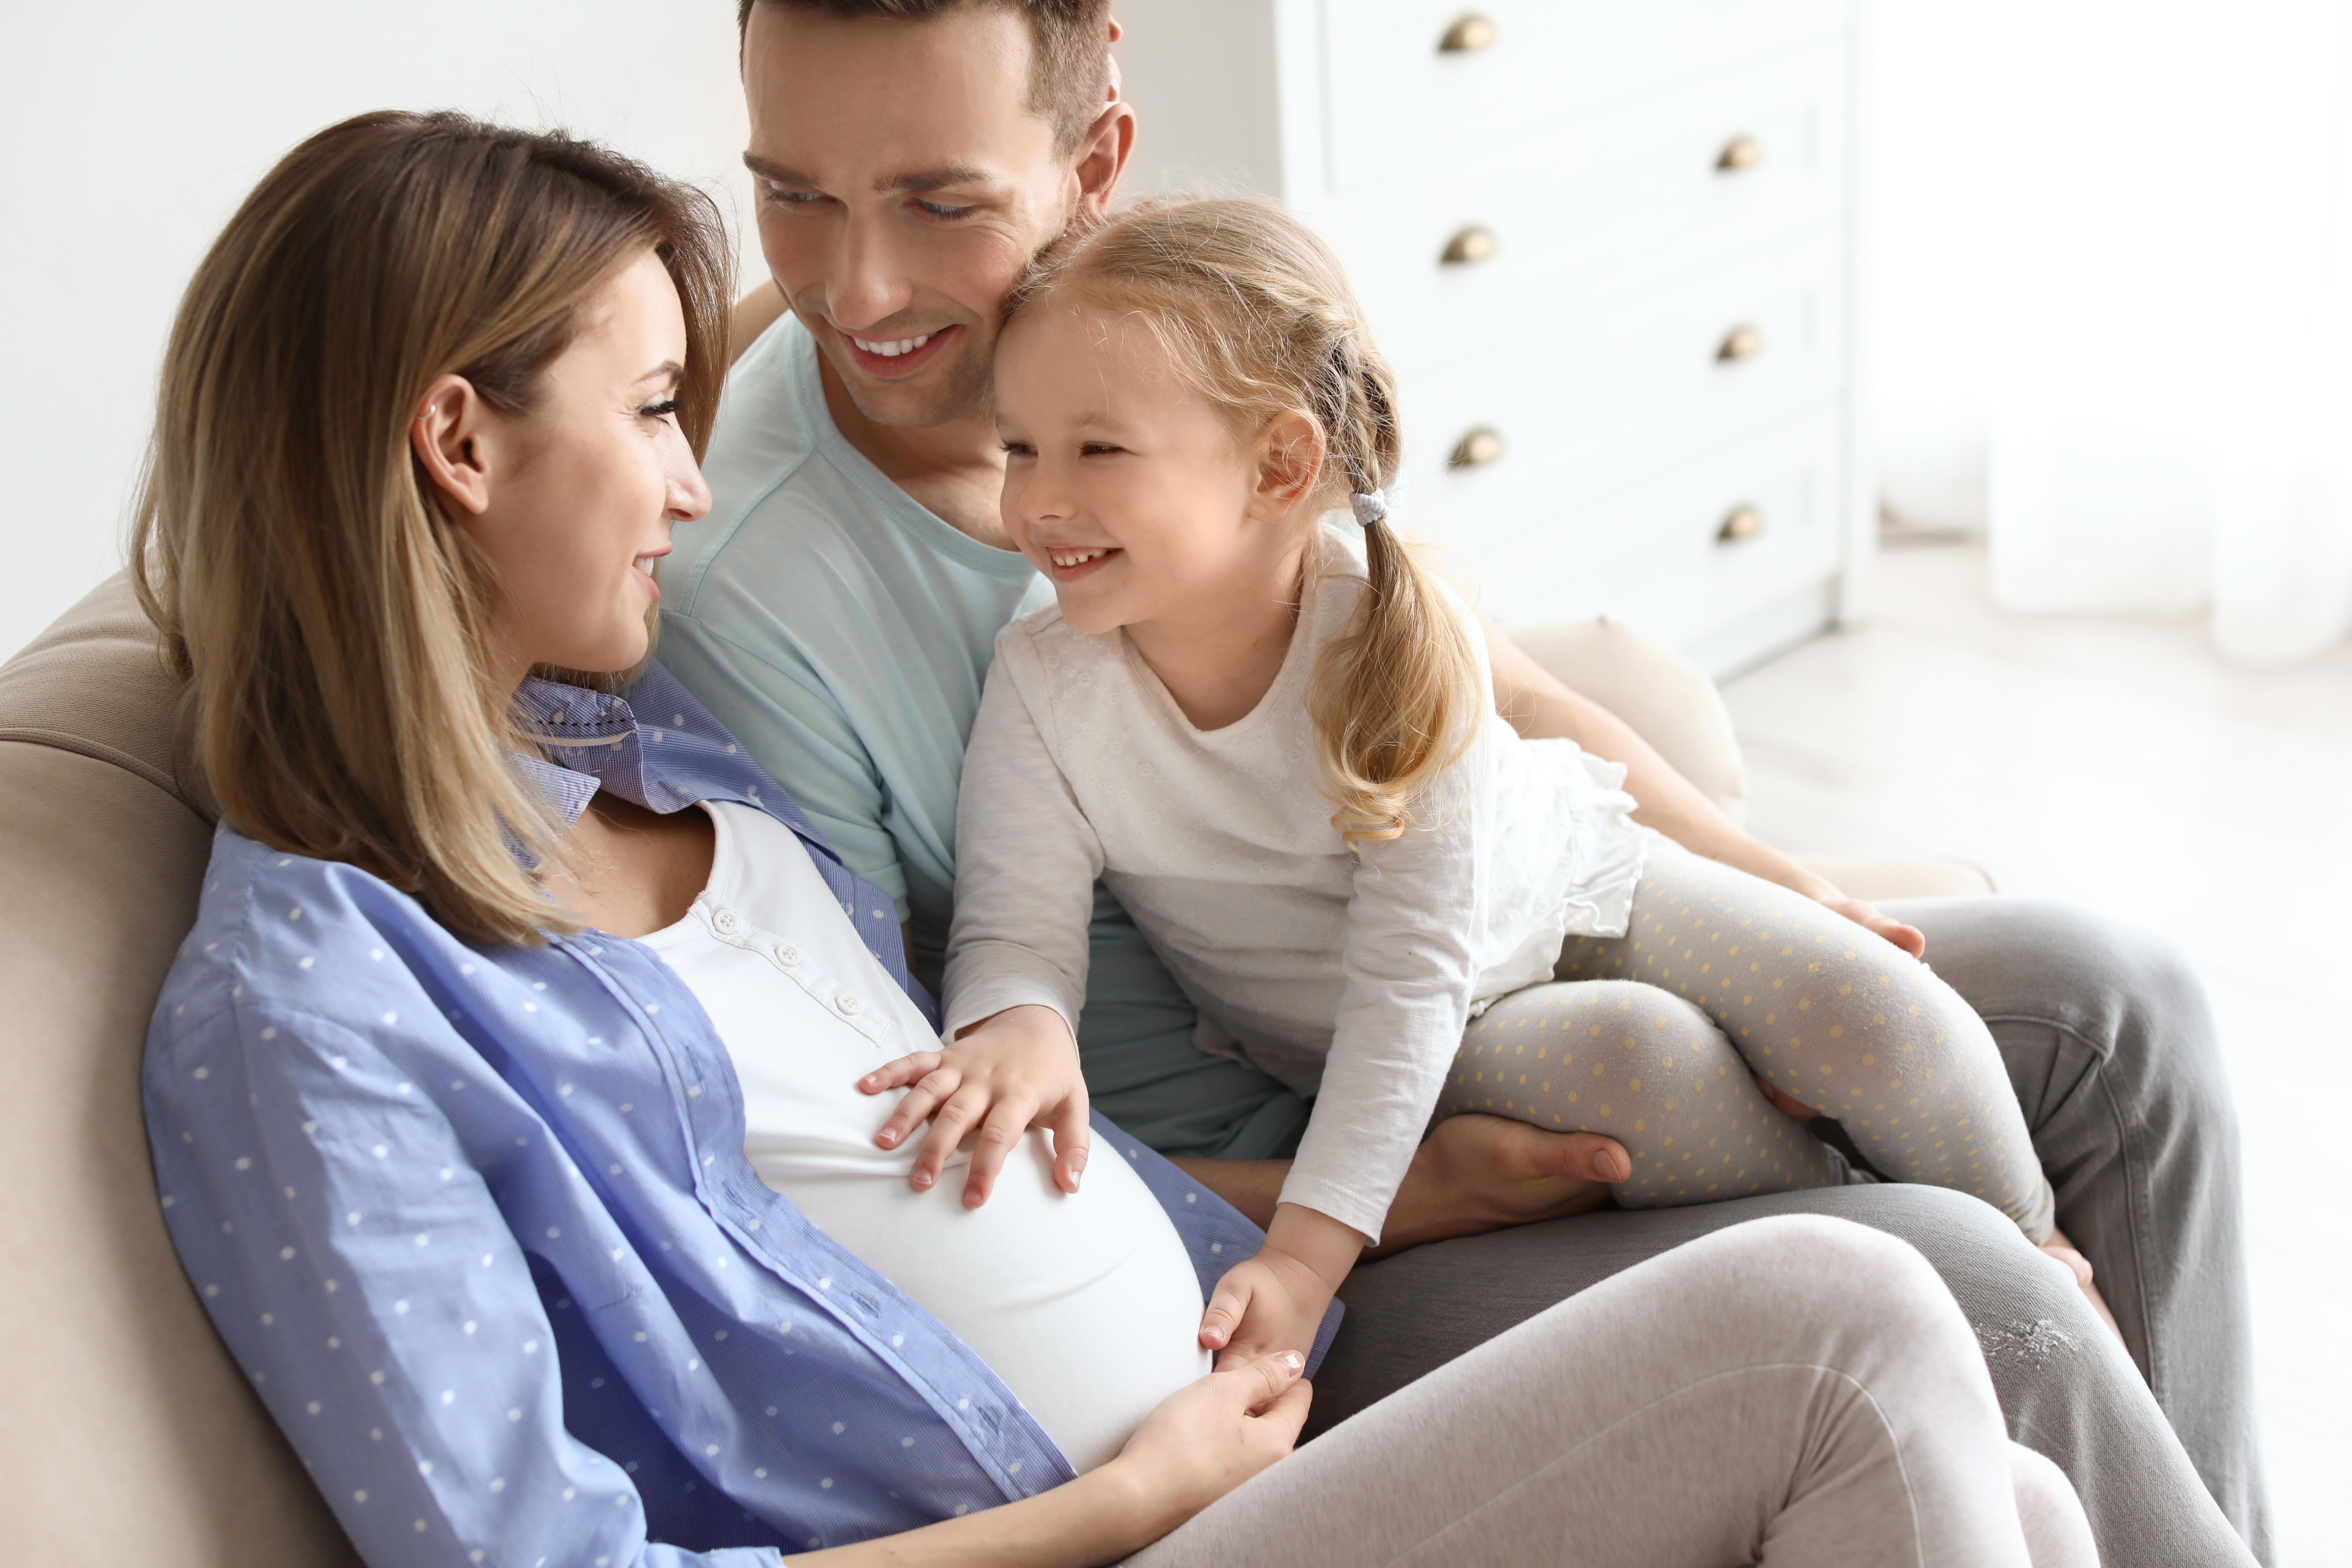 A pregnant woman with her husband and little daughter at home | Source: Shutterstock